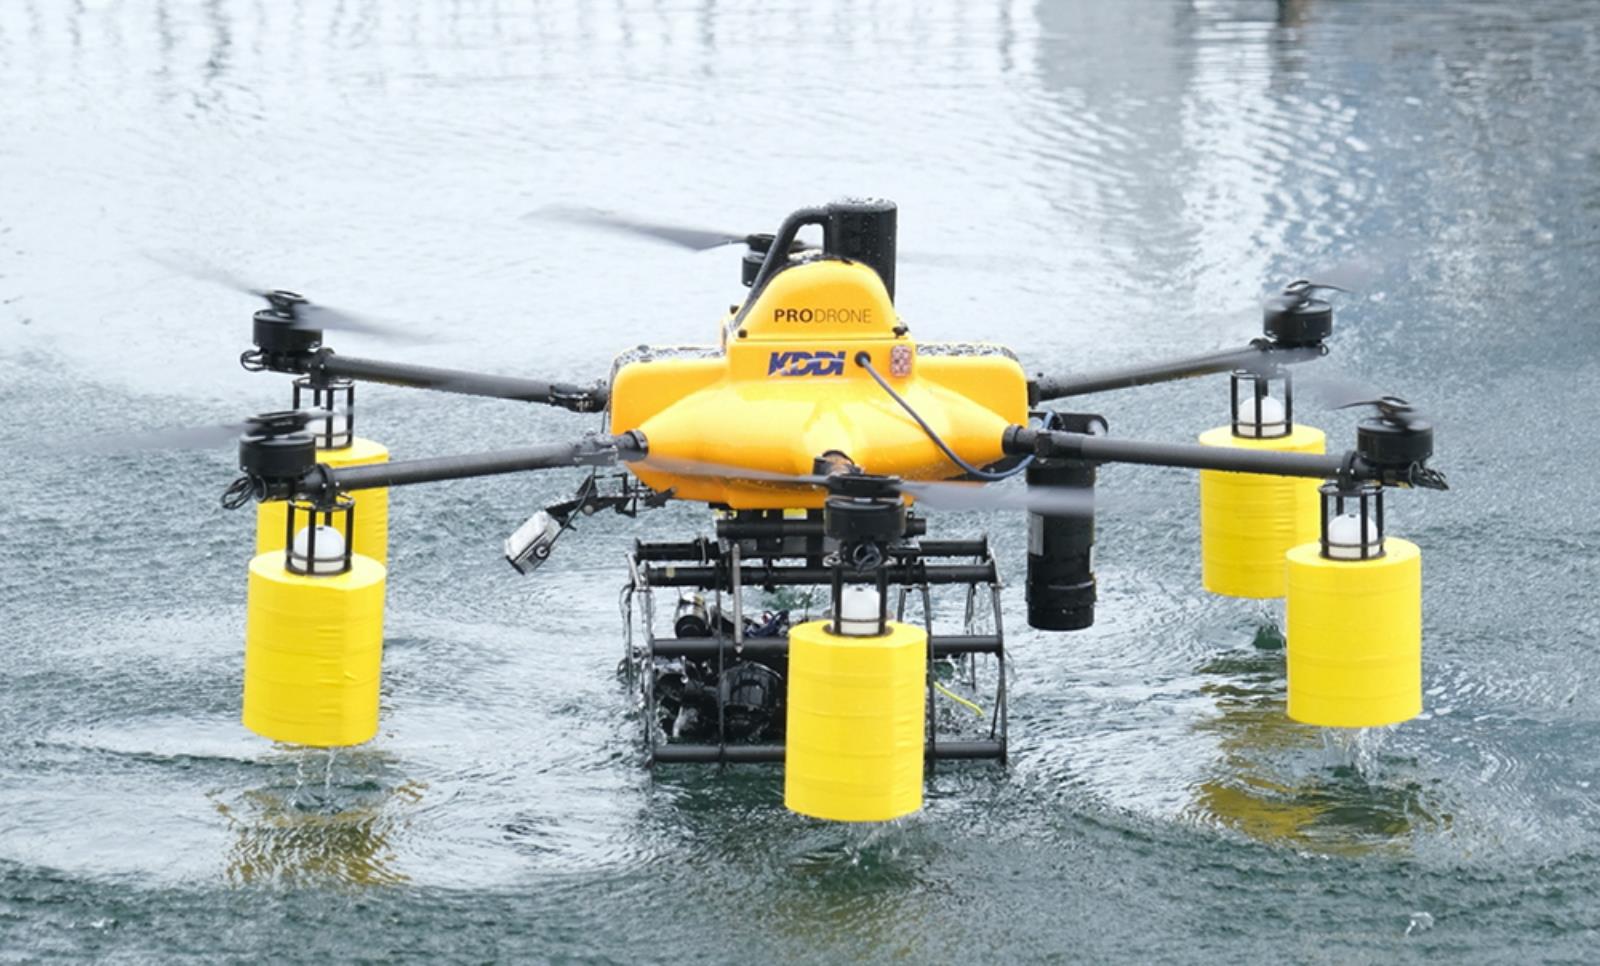 This is FIFISH + KDDI, the first combination of an underwater drone with a flying drone